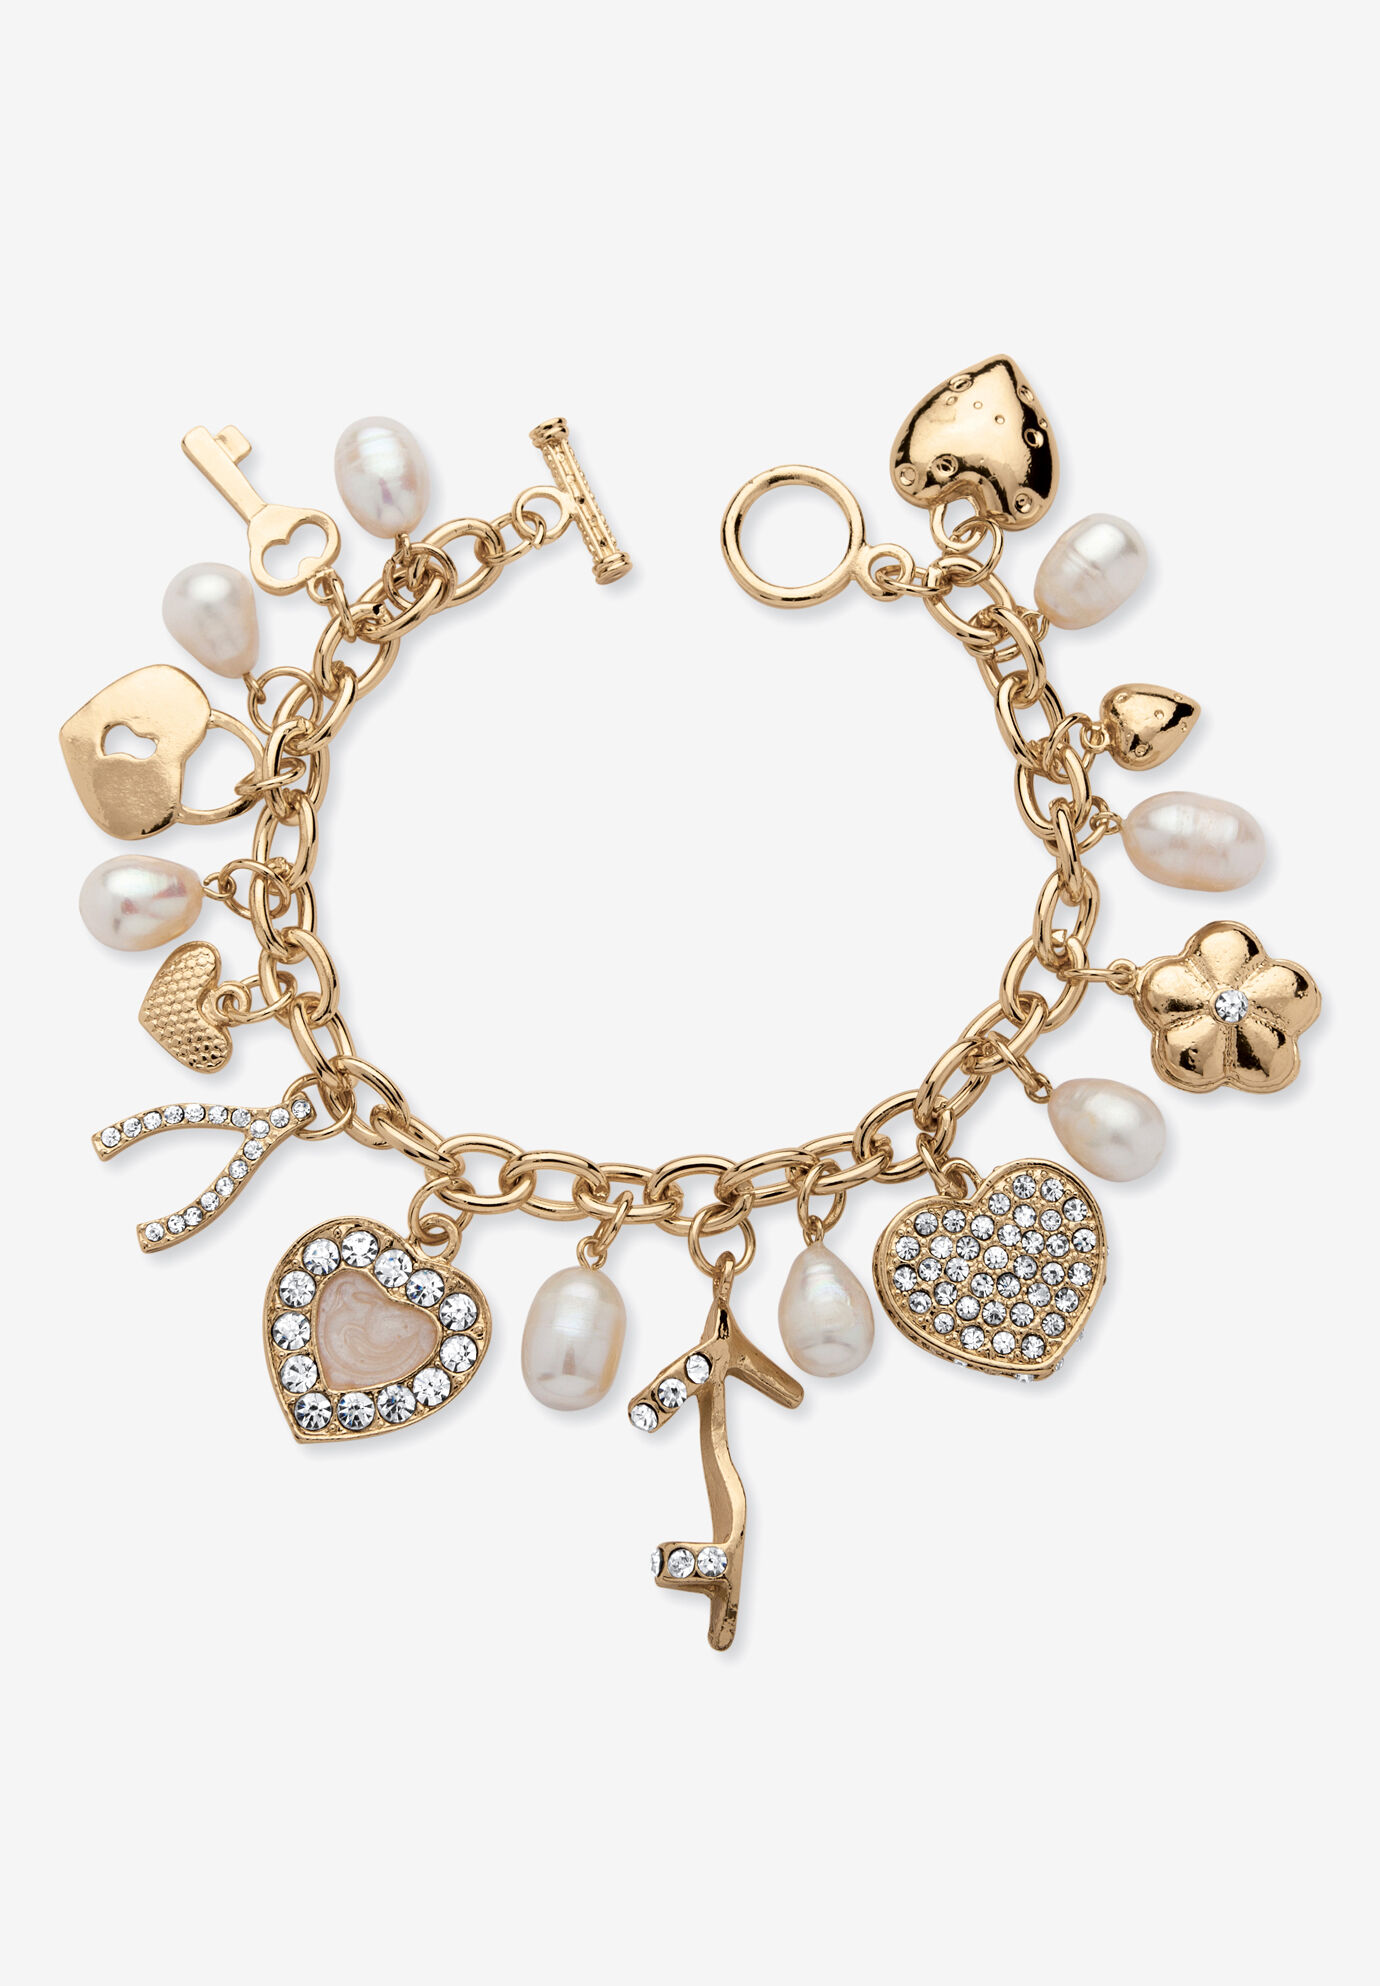 Gold Charm Bracelet with 8 Charms